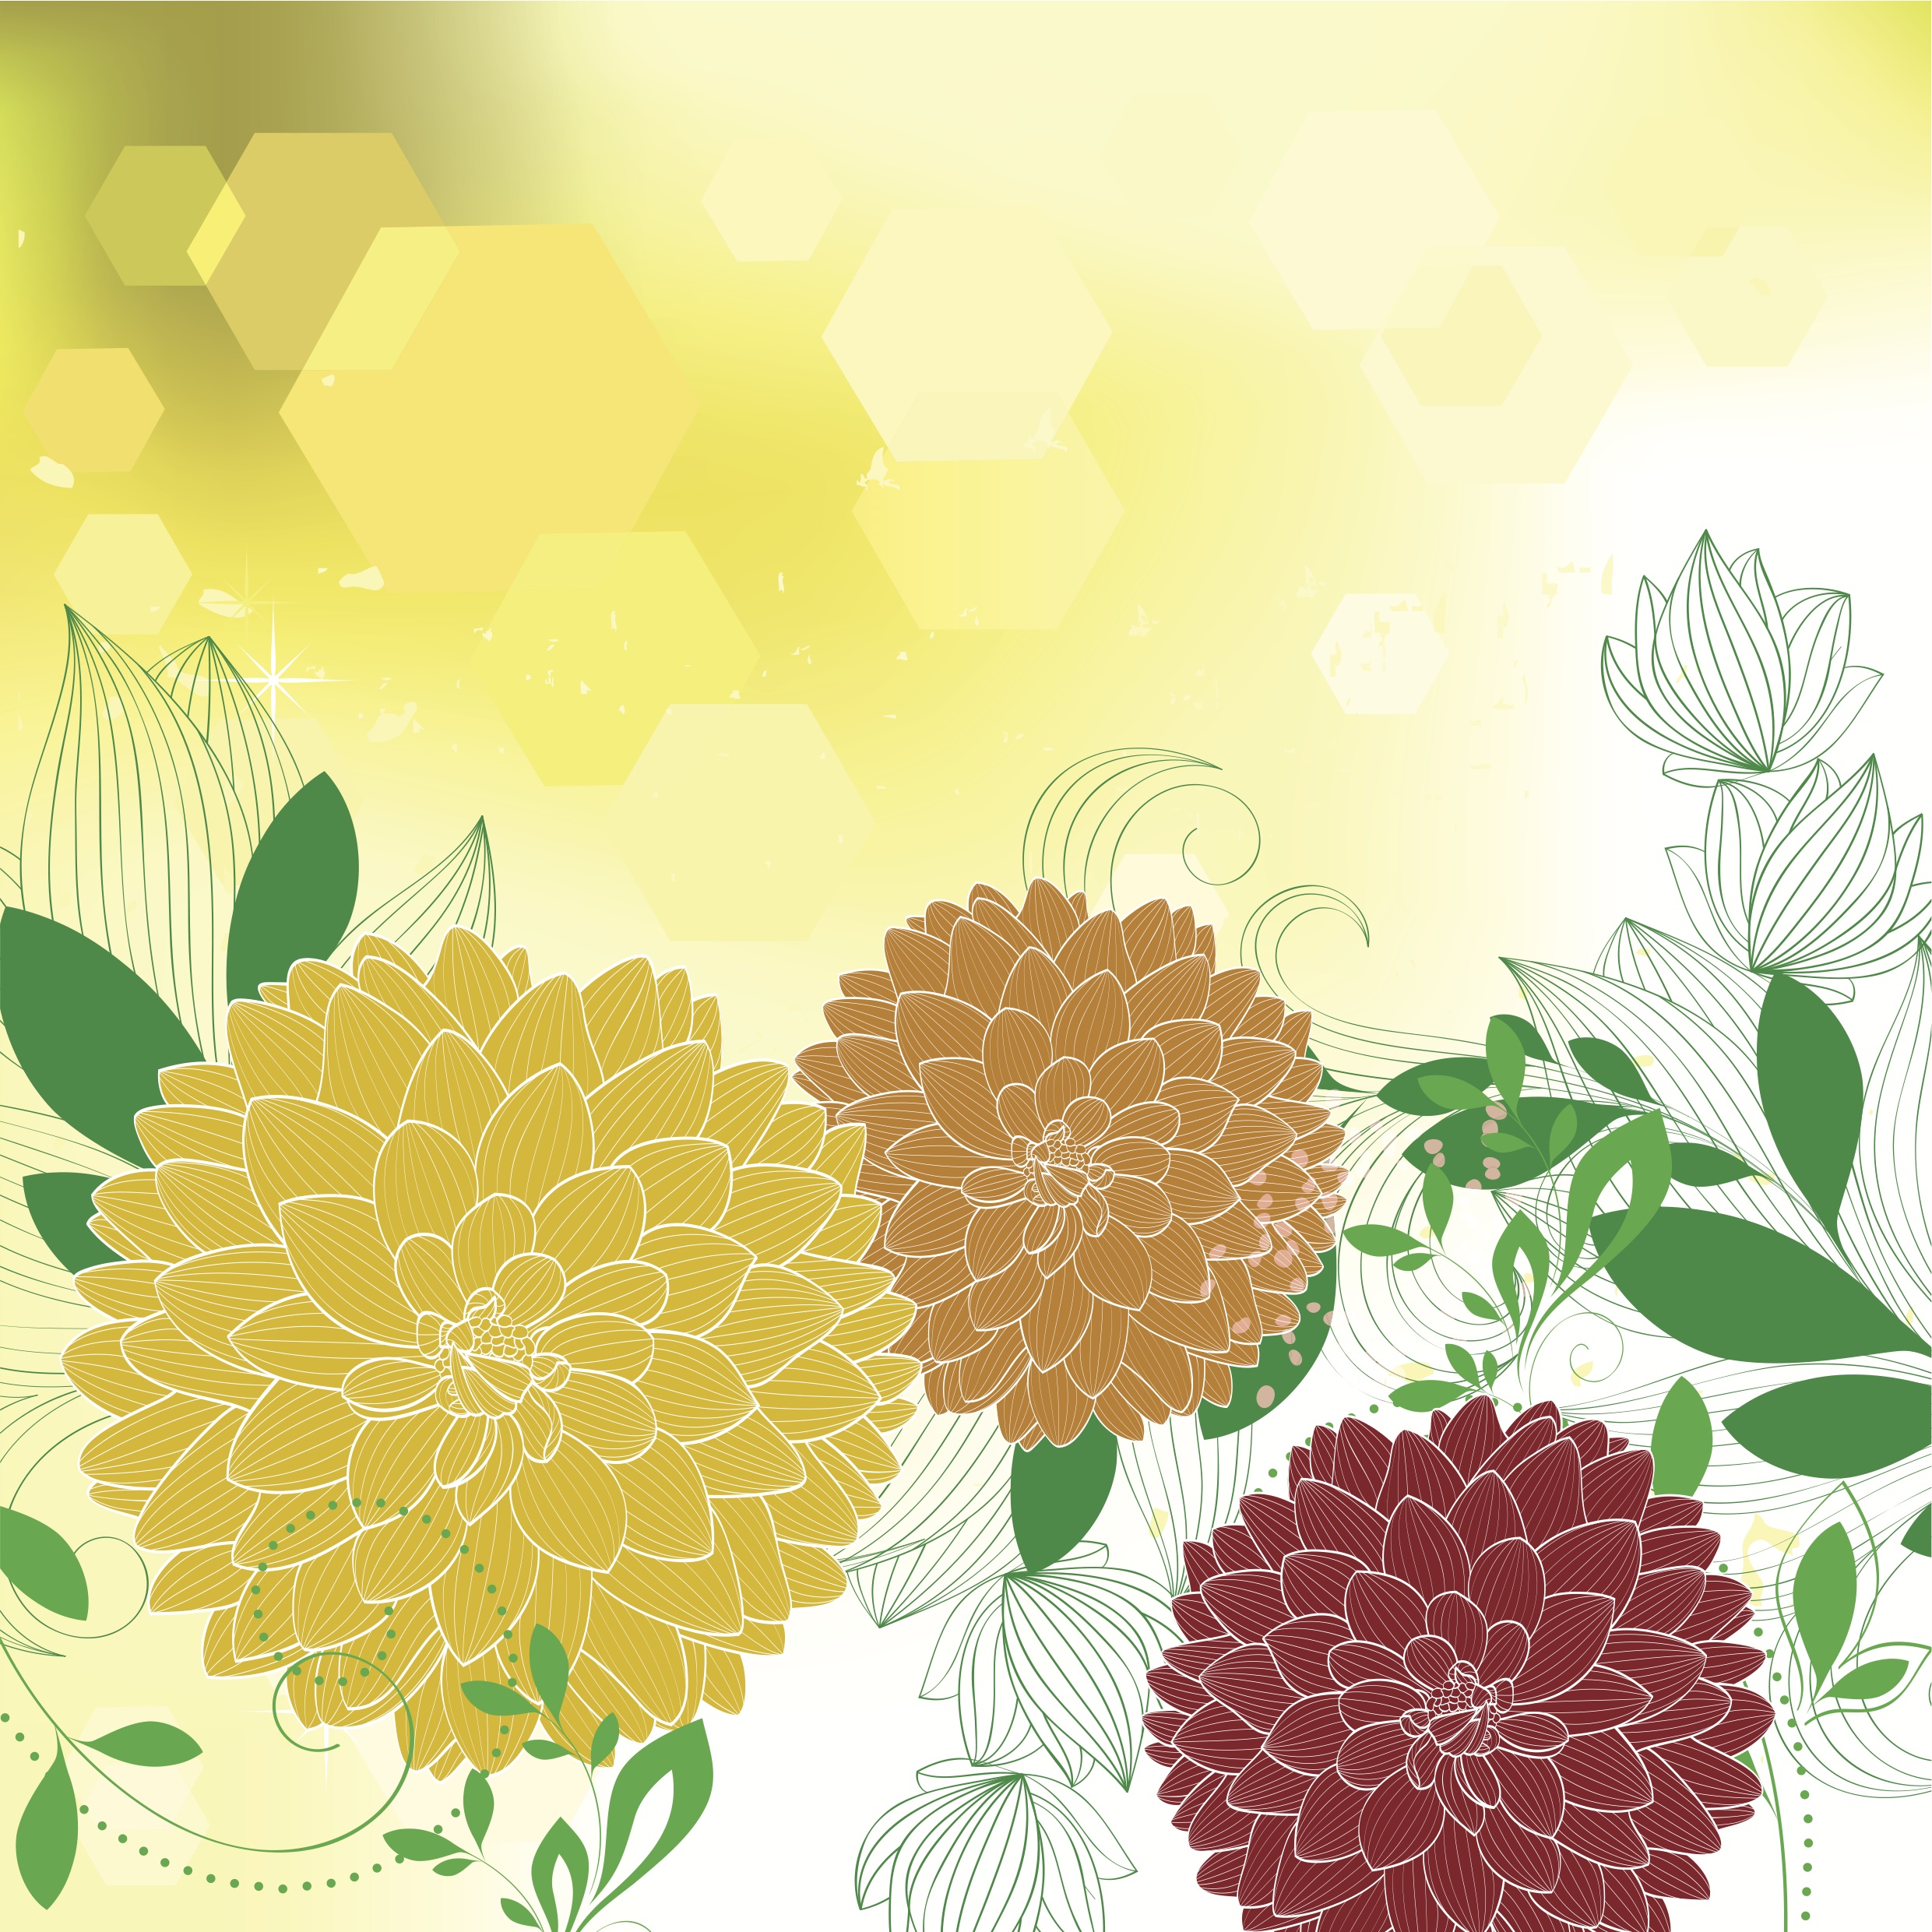 Abstract Flower Vector Background Vector Art & Graphics | freevector.com